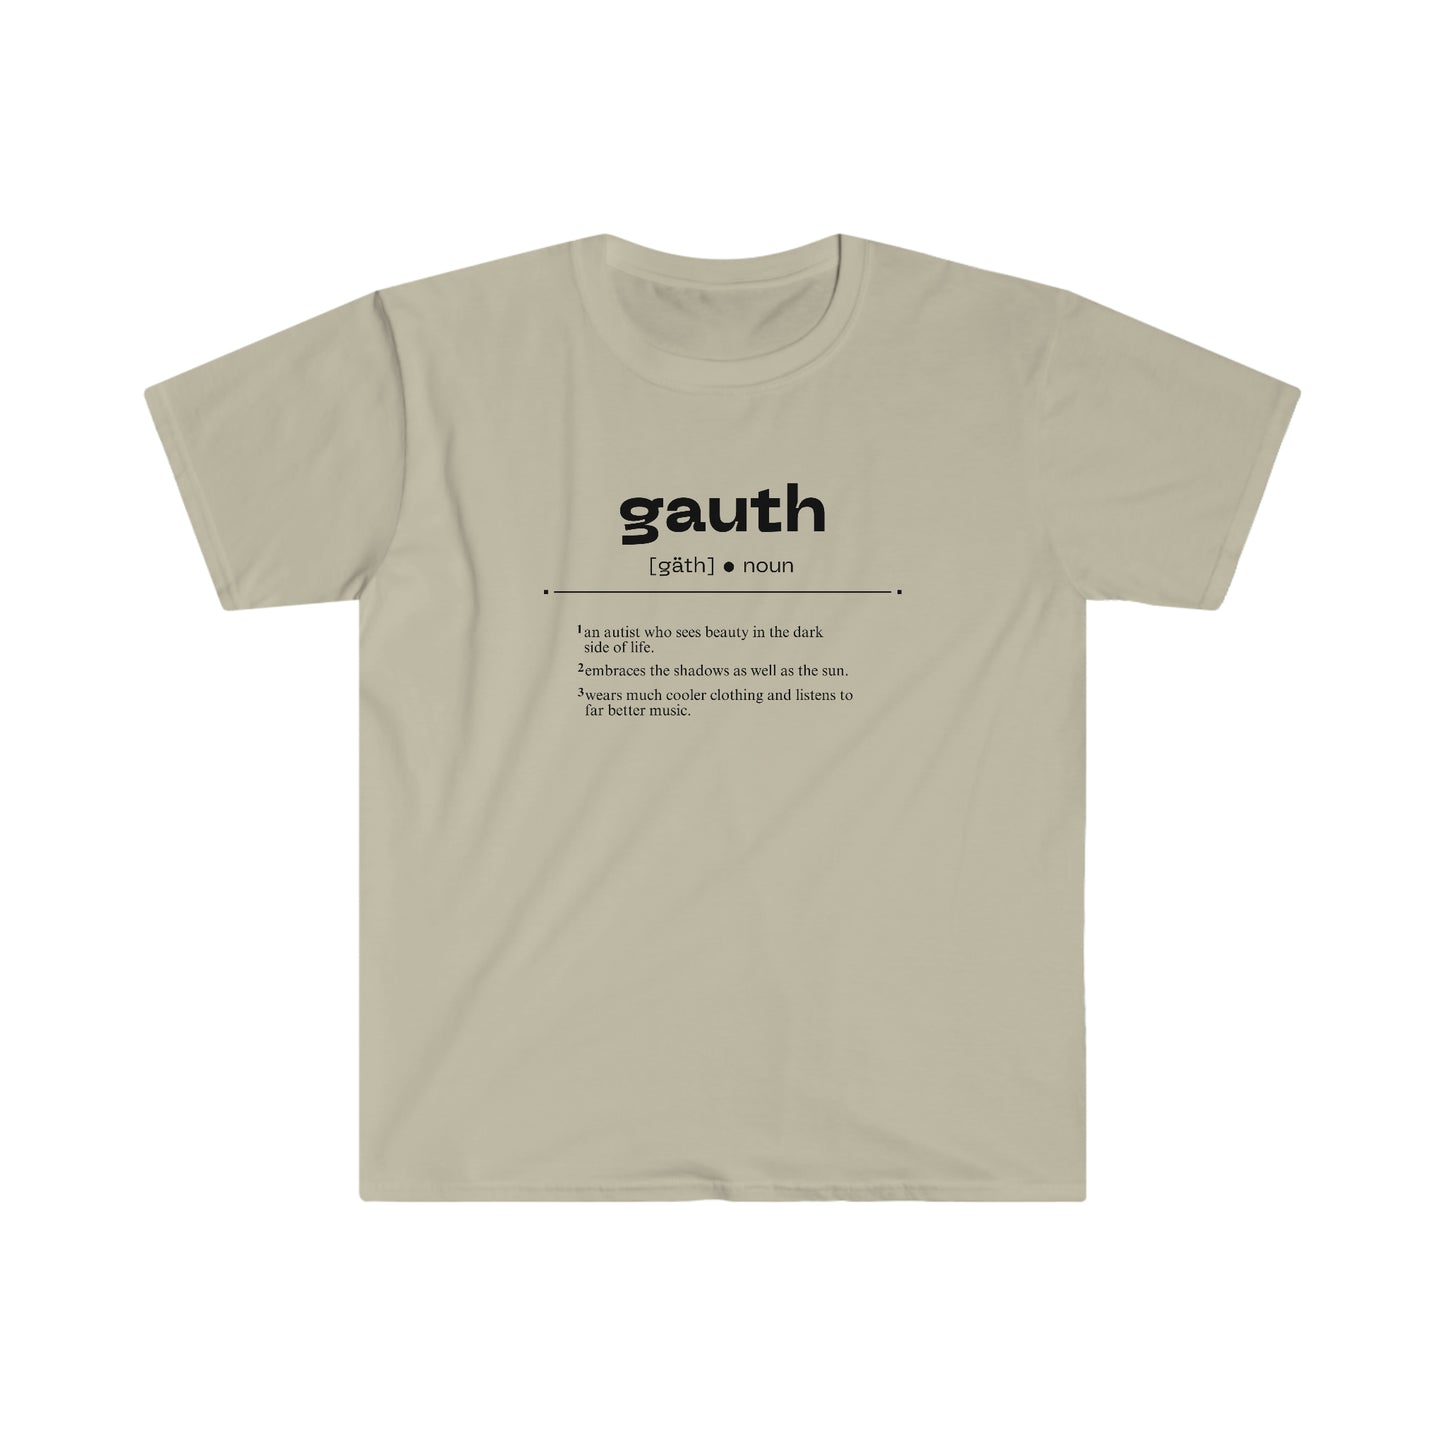 Goth Redefined [Gauthism Line] Unisex Softstyle T-Shirt